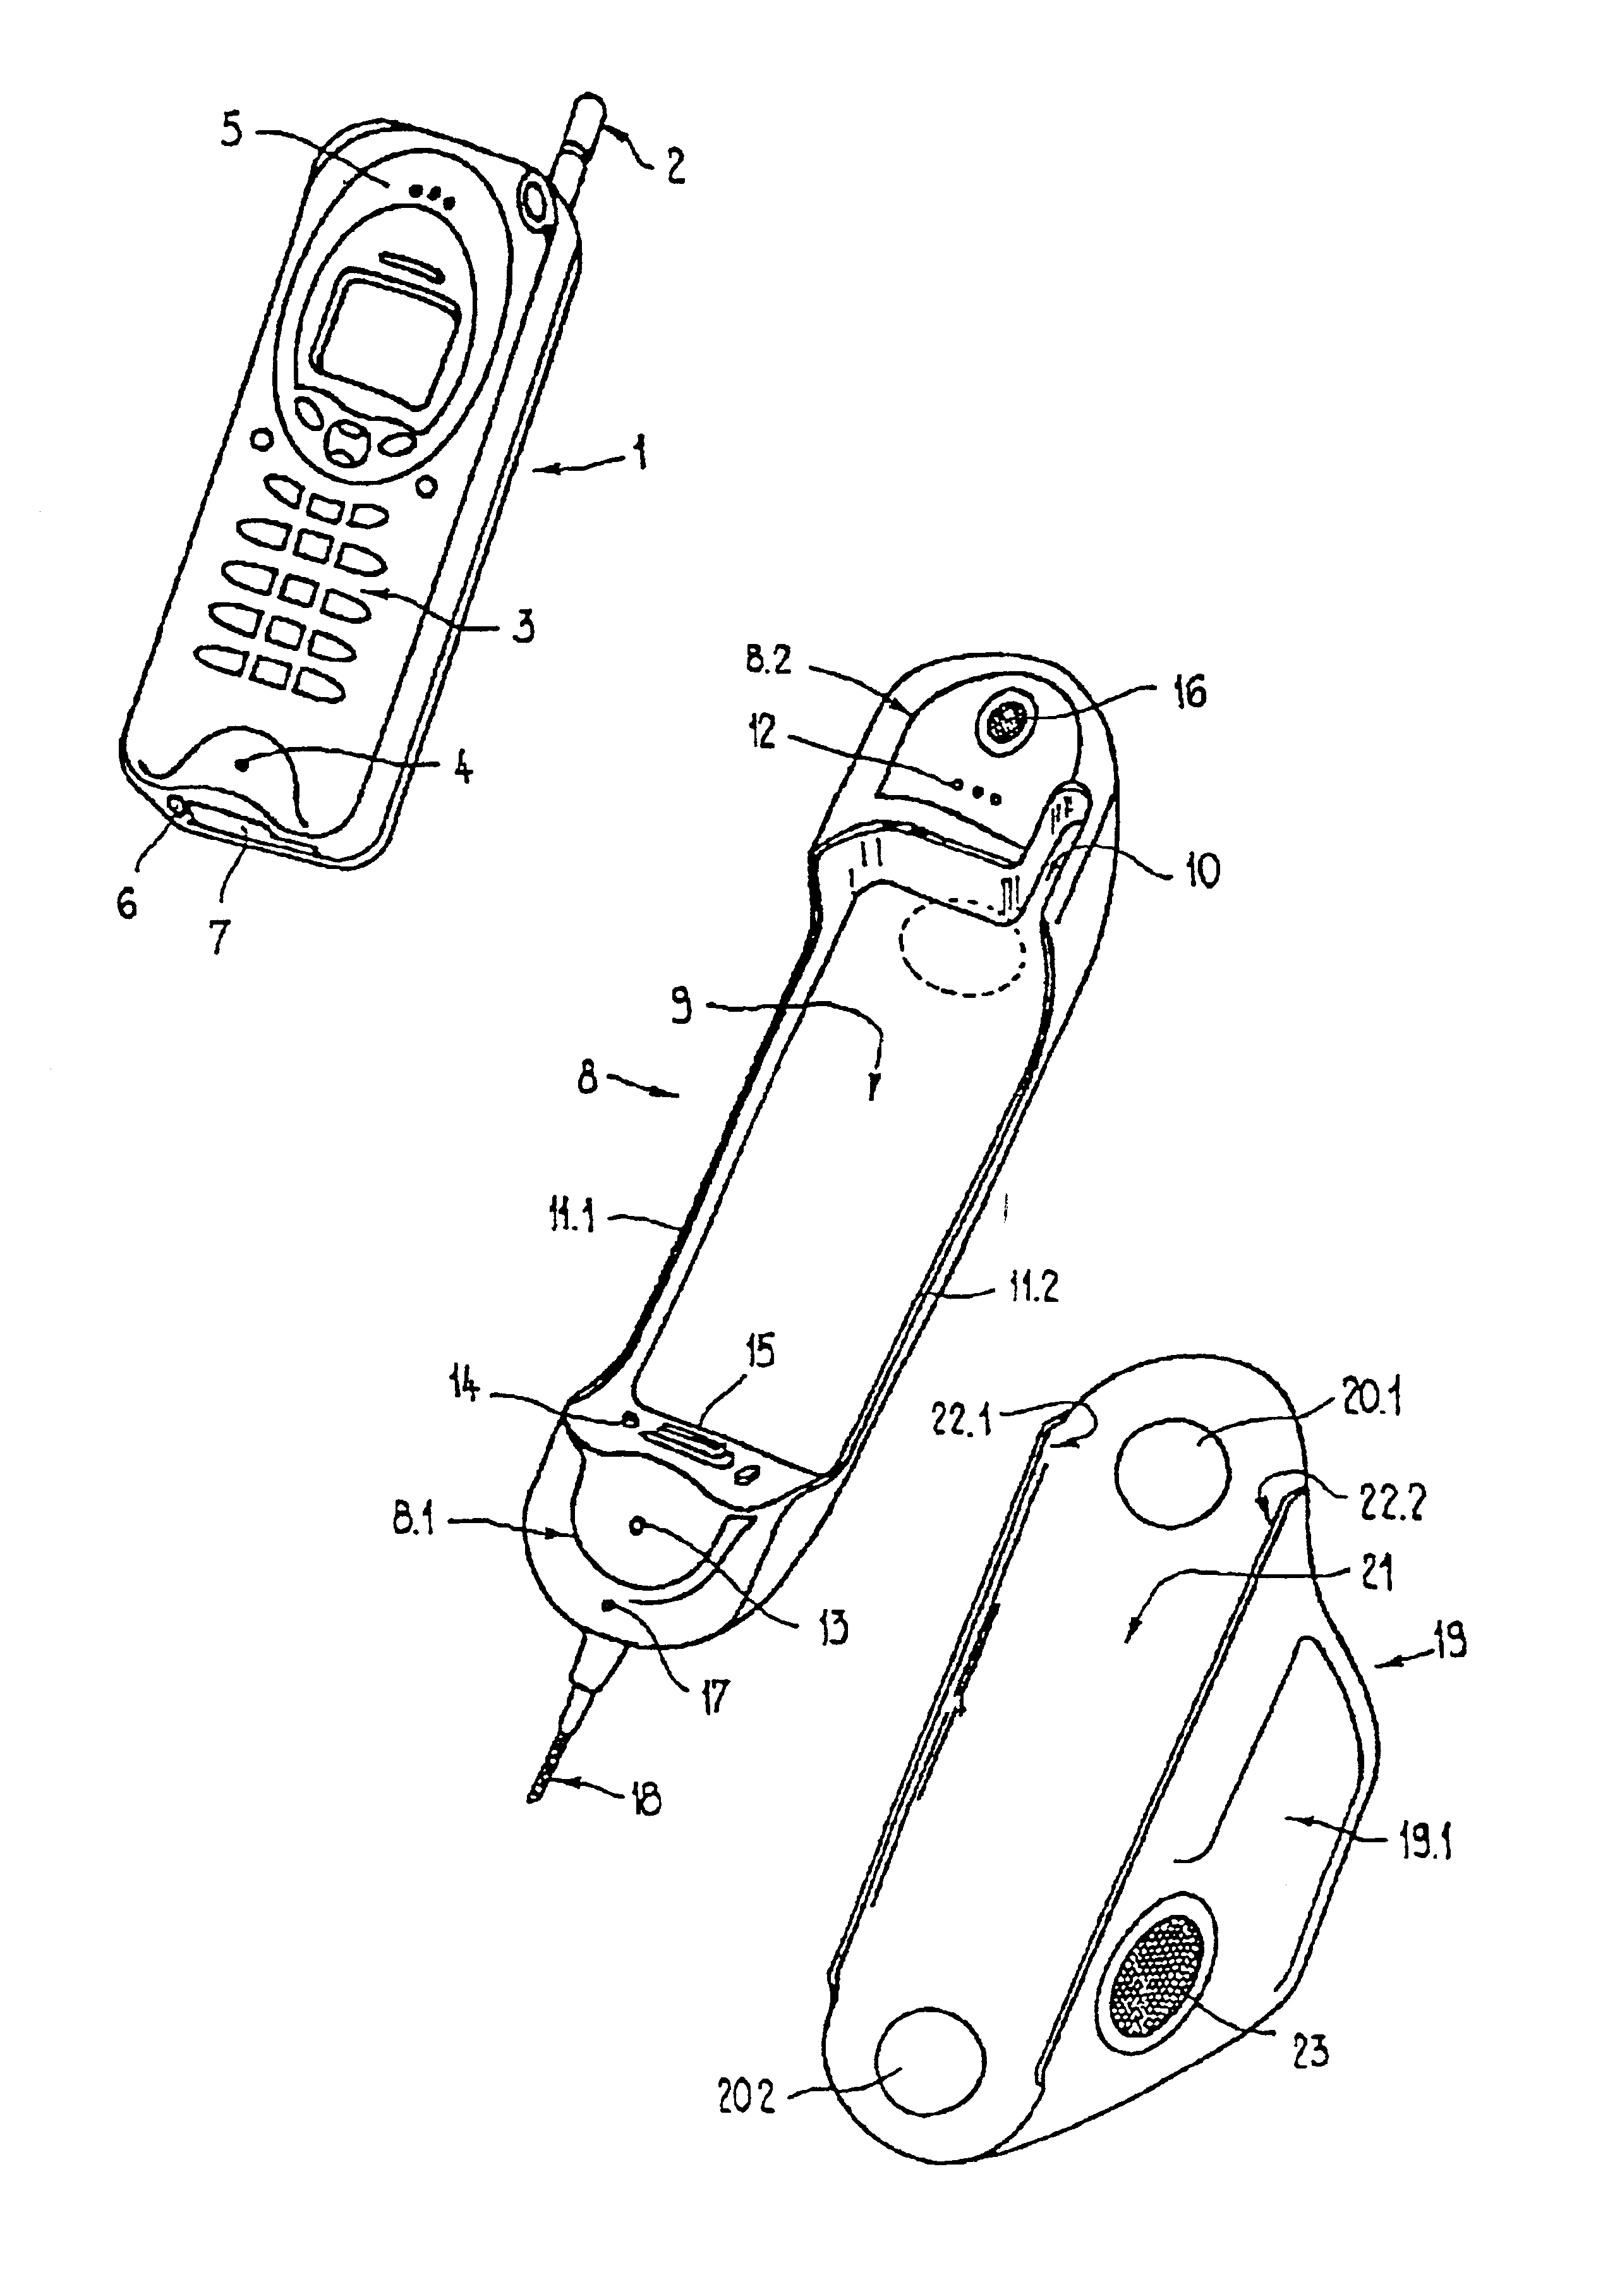 Telephone set with a handset having a mouthpiece and/or an earpiece